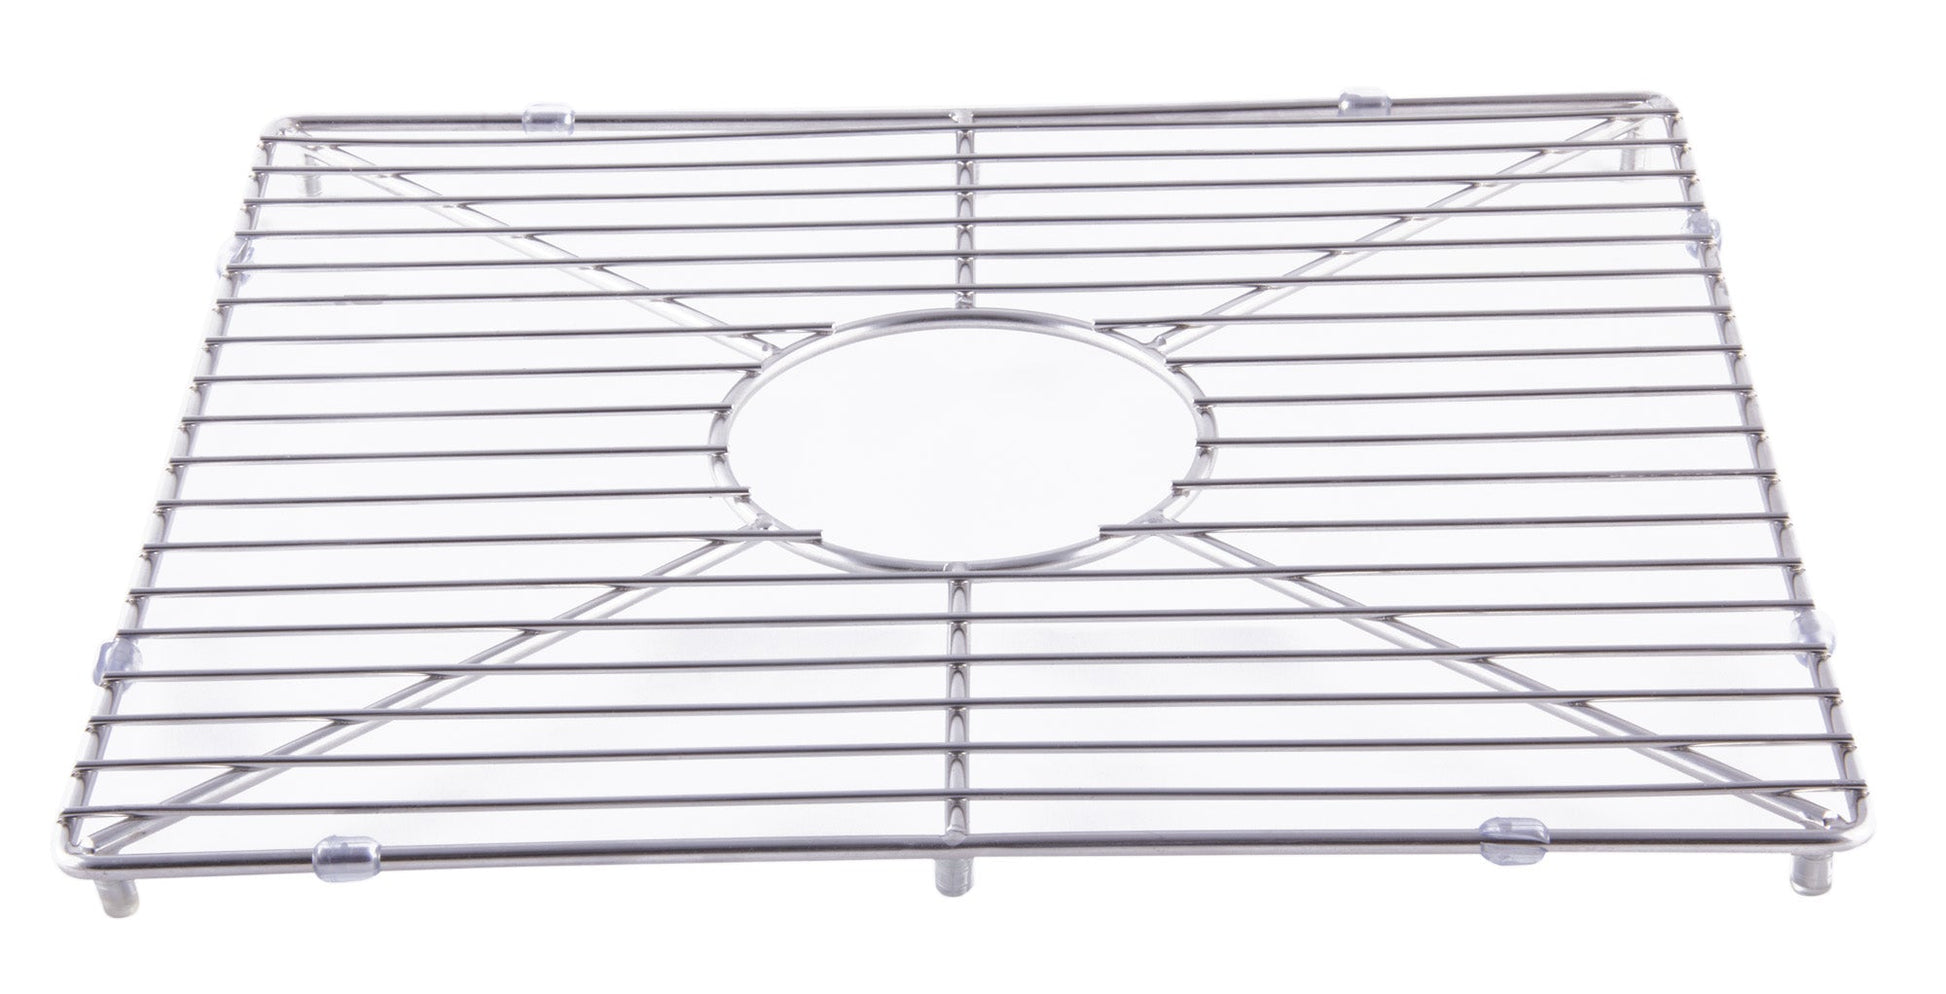 Alfi Brand Stainless steel kitchen sink grid for AB3918DB, AB3918ARCH